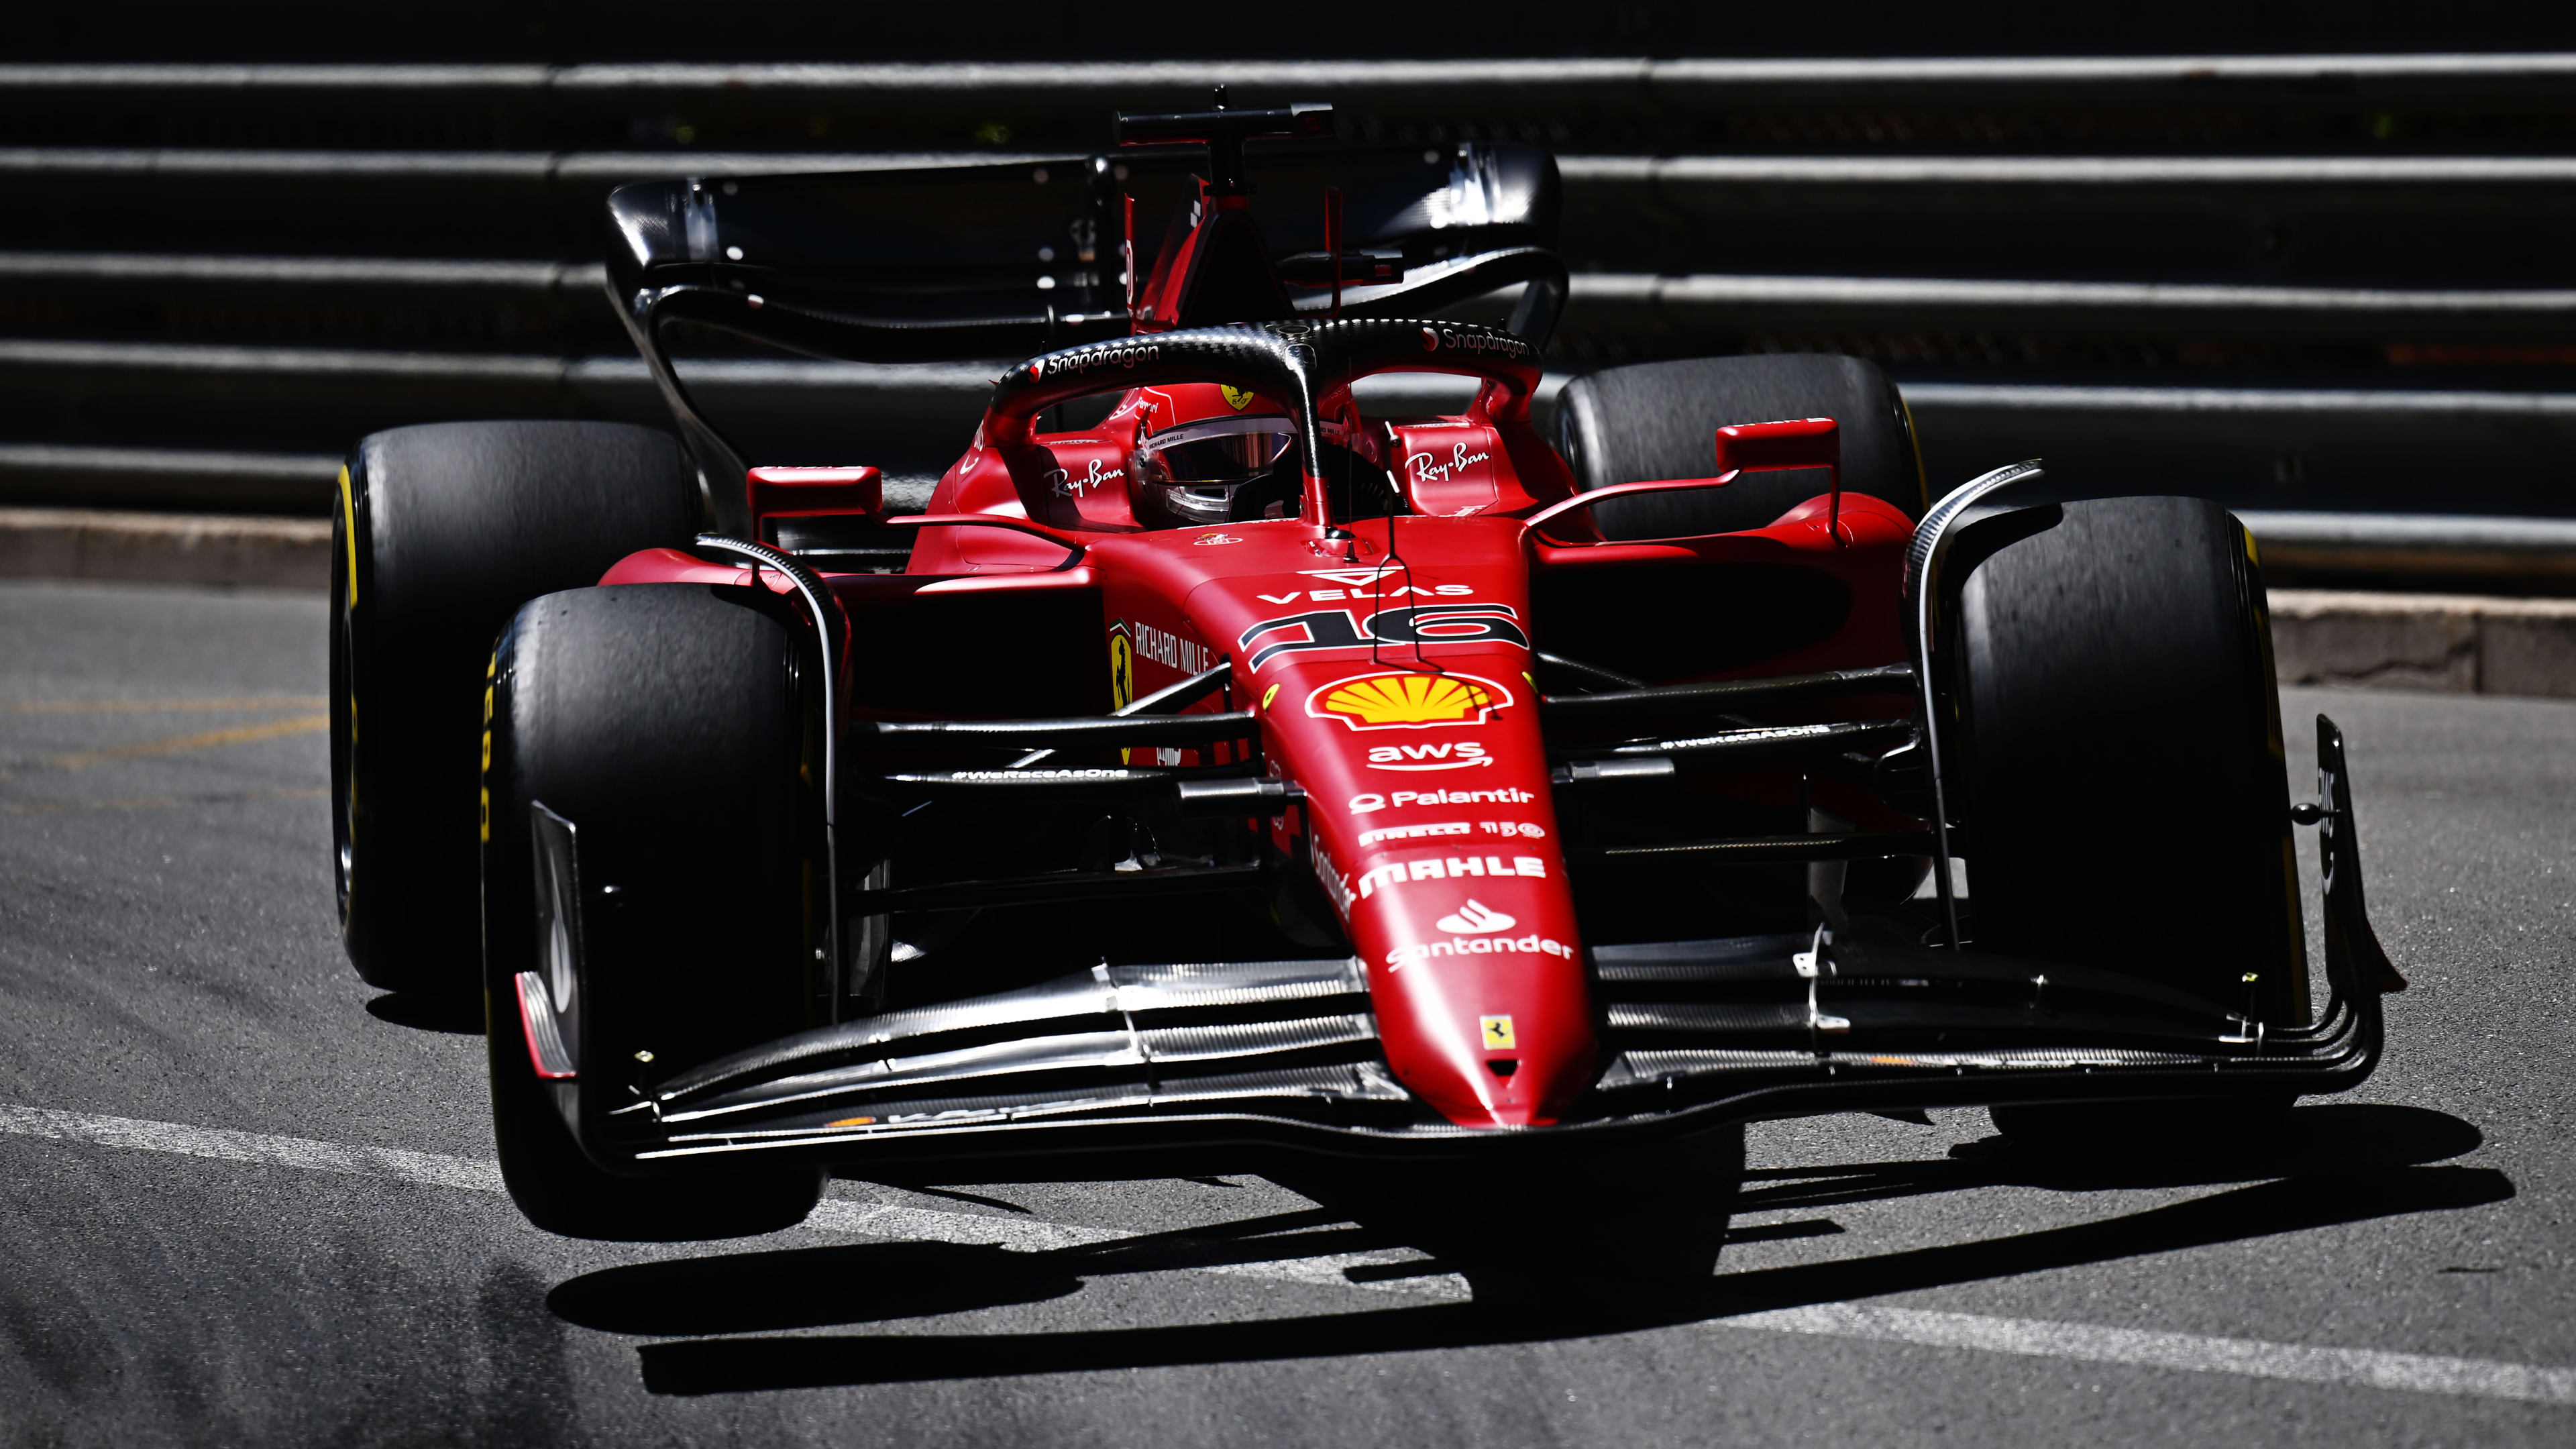 2022 Monaco Grand Prix FP1 report and highlights Leclerc leads opening Monaco practice as top three split by just 0.07s Formula 1®